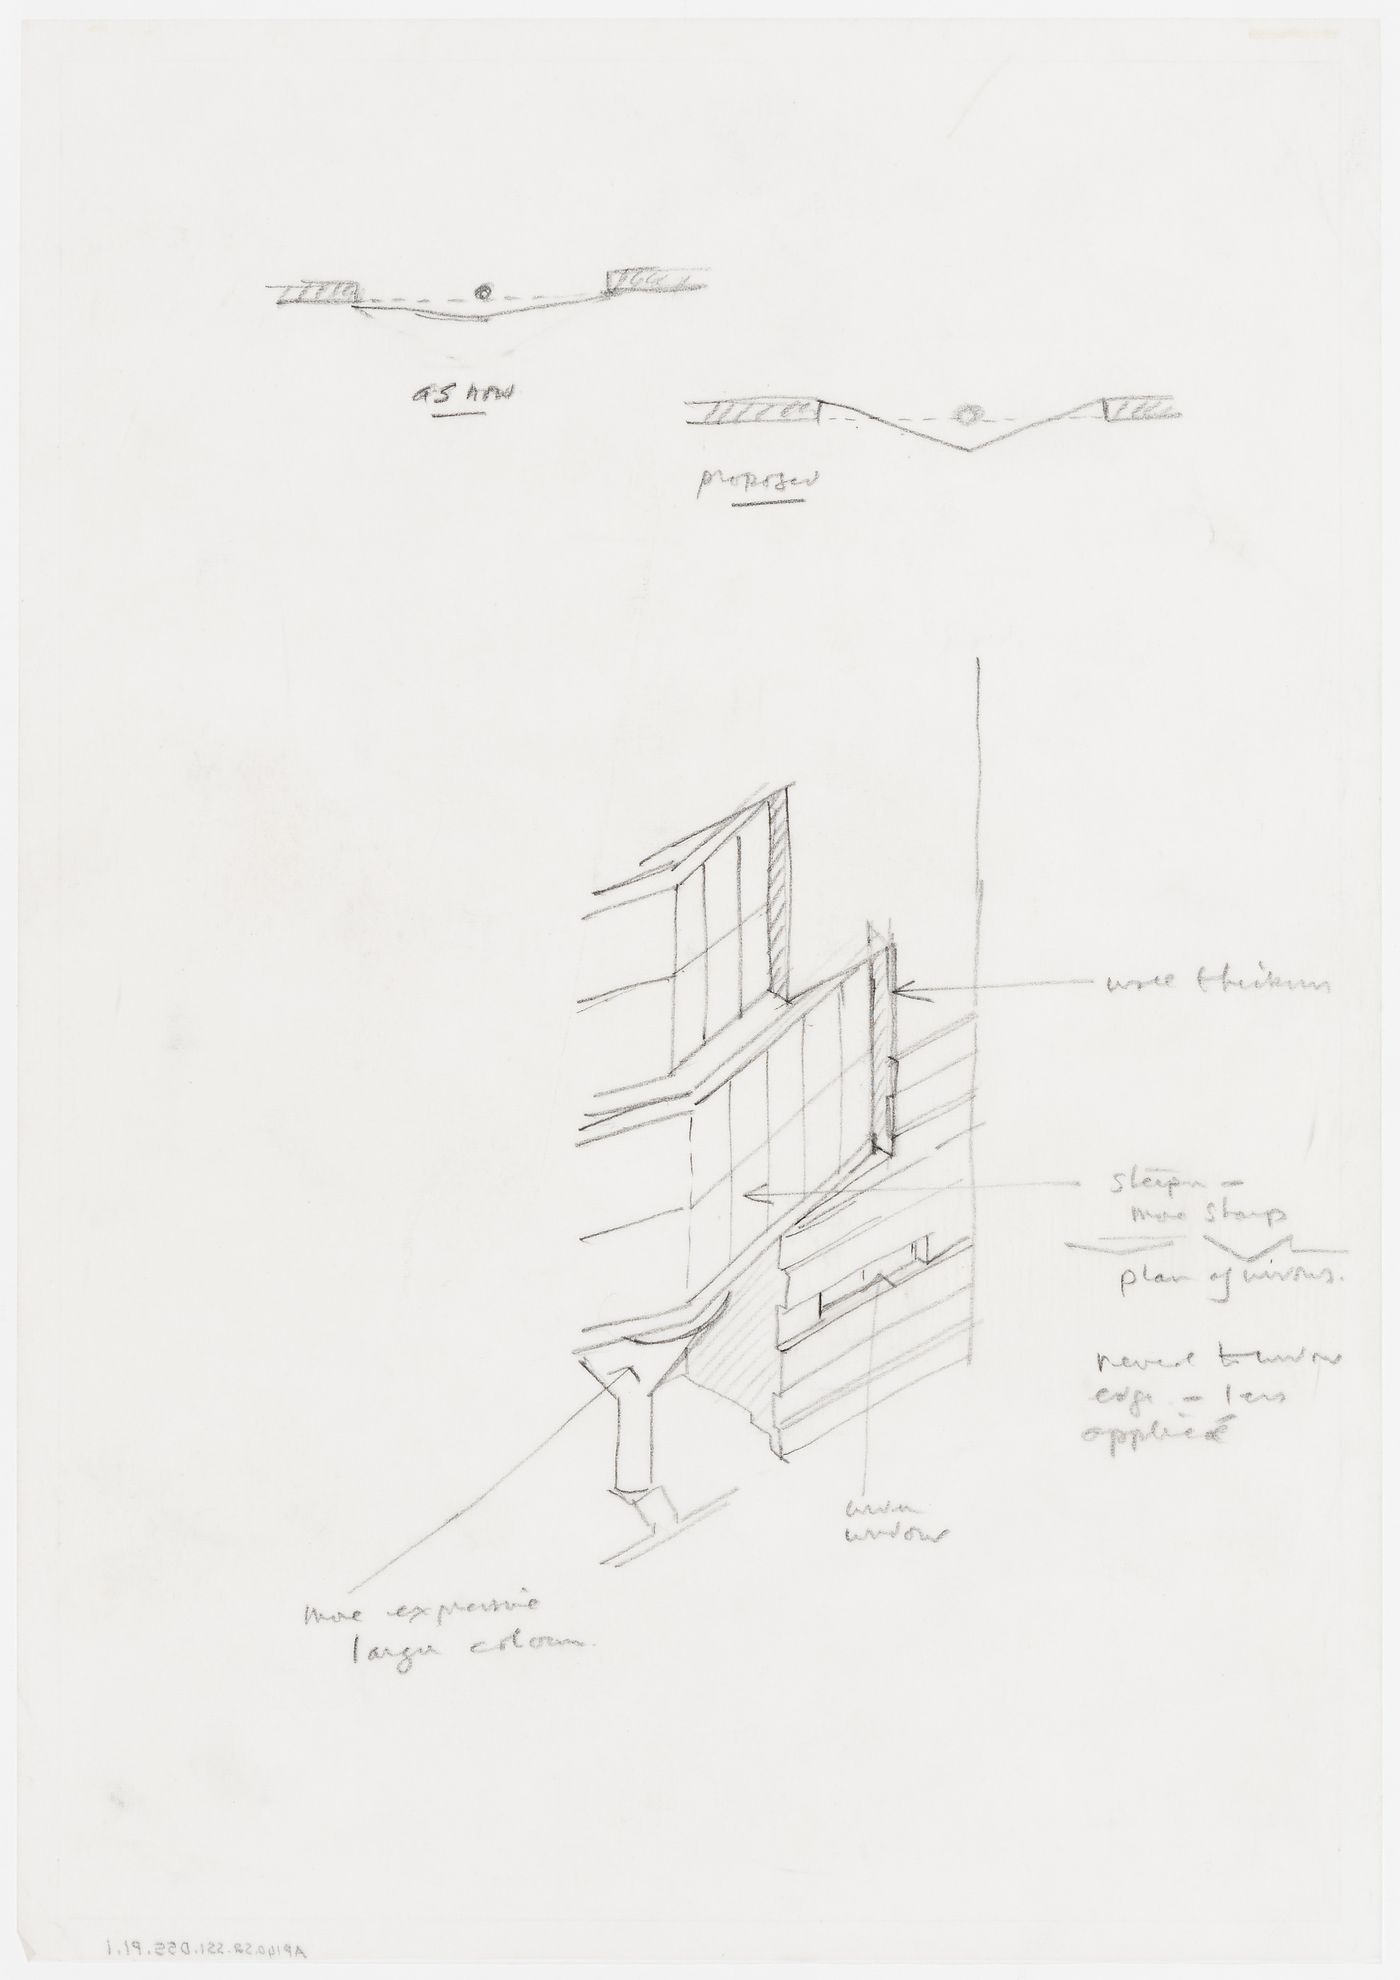 Eleven Townhouses Competition, New York, New York: sketches of the facade
